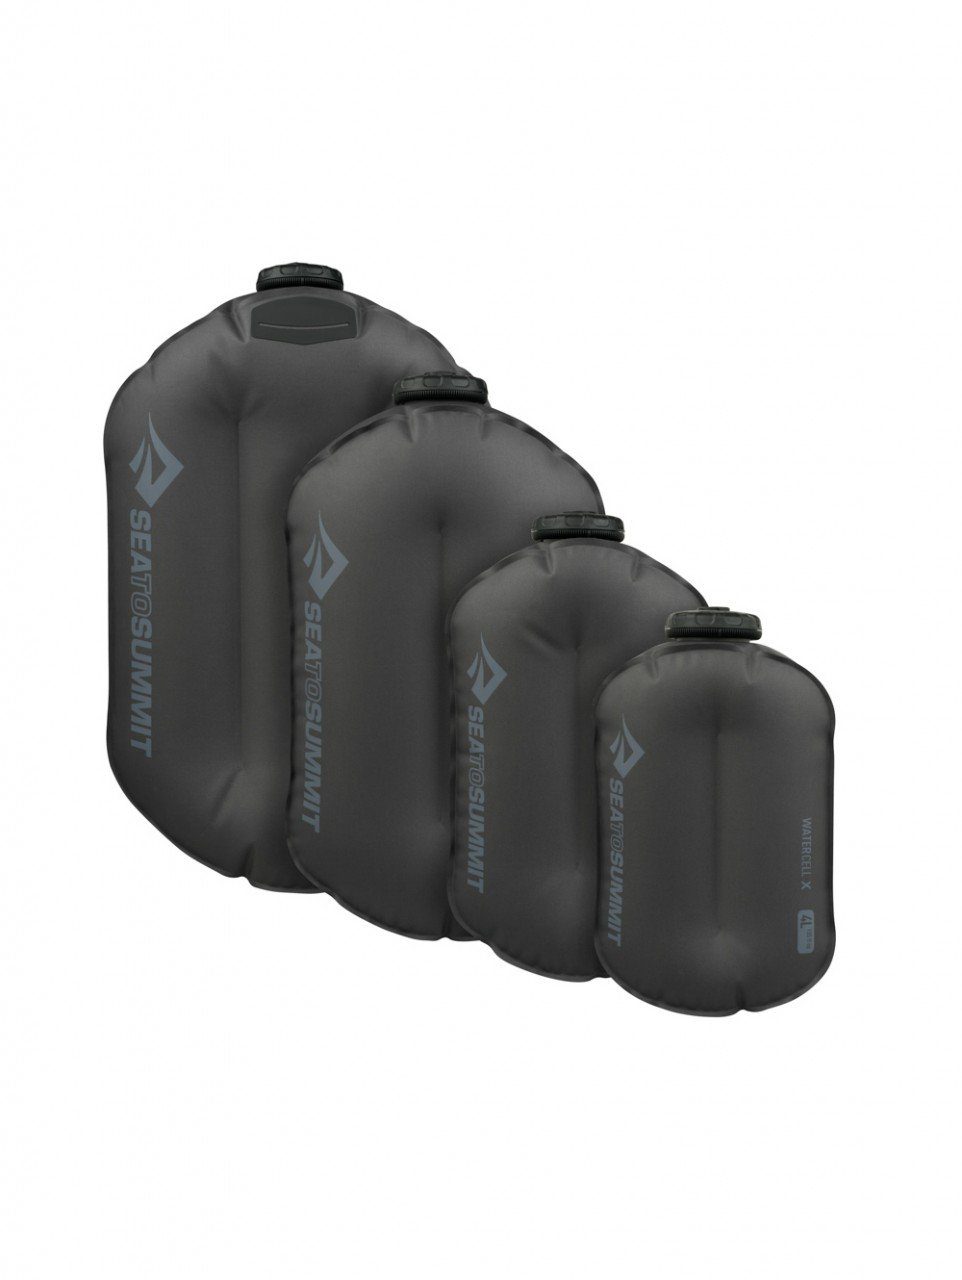 sea to summit Kanister Watercell 4L X